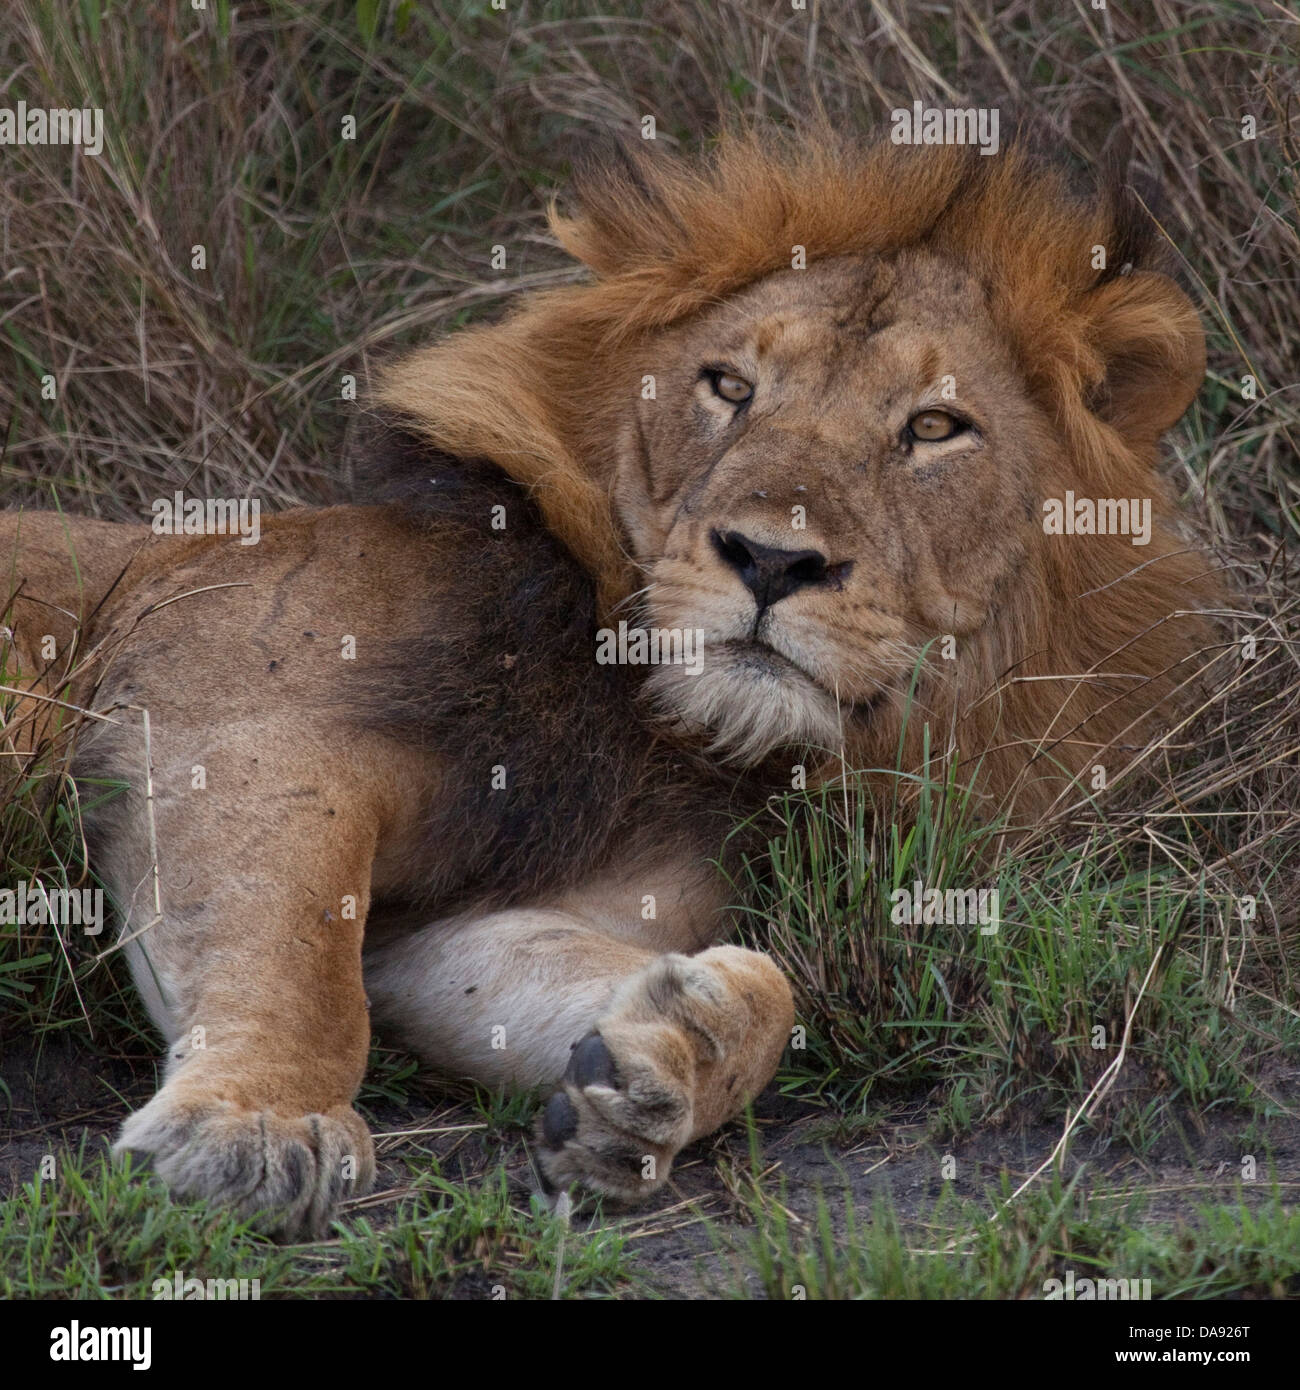 Black continent, pearl of Africa, Great Rift, Queen Elisabeth, national park, nature, lion, lion males, beasts of prey, mammals, Stock Photo